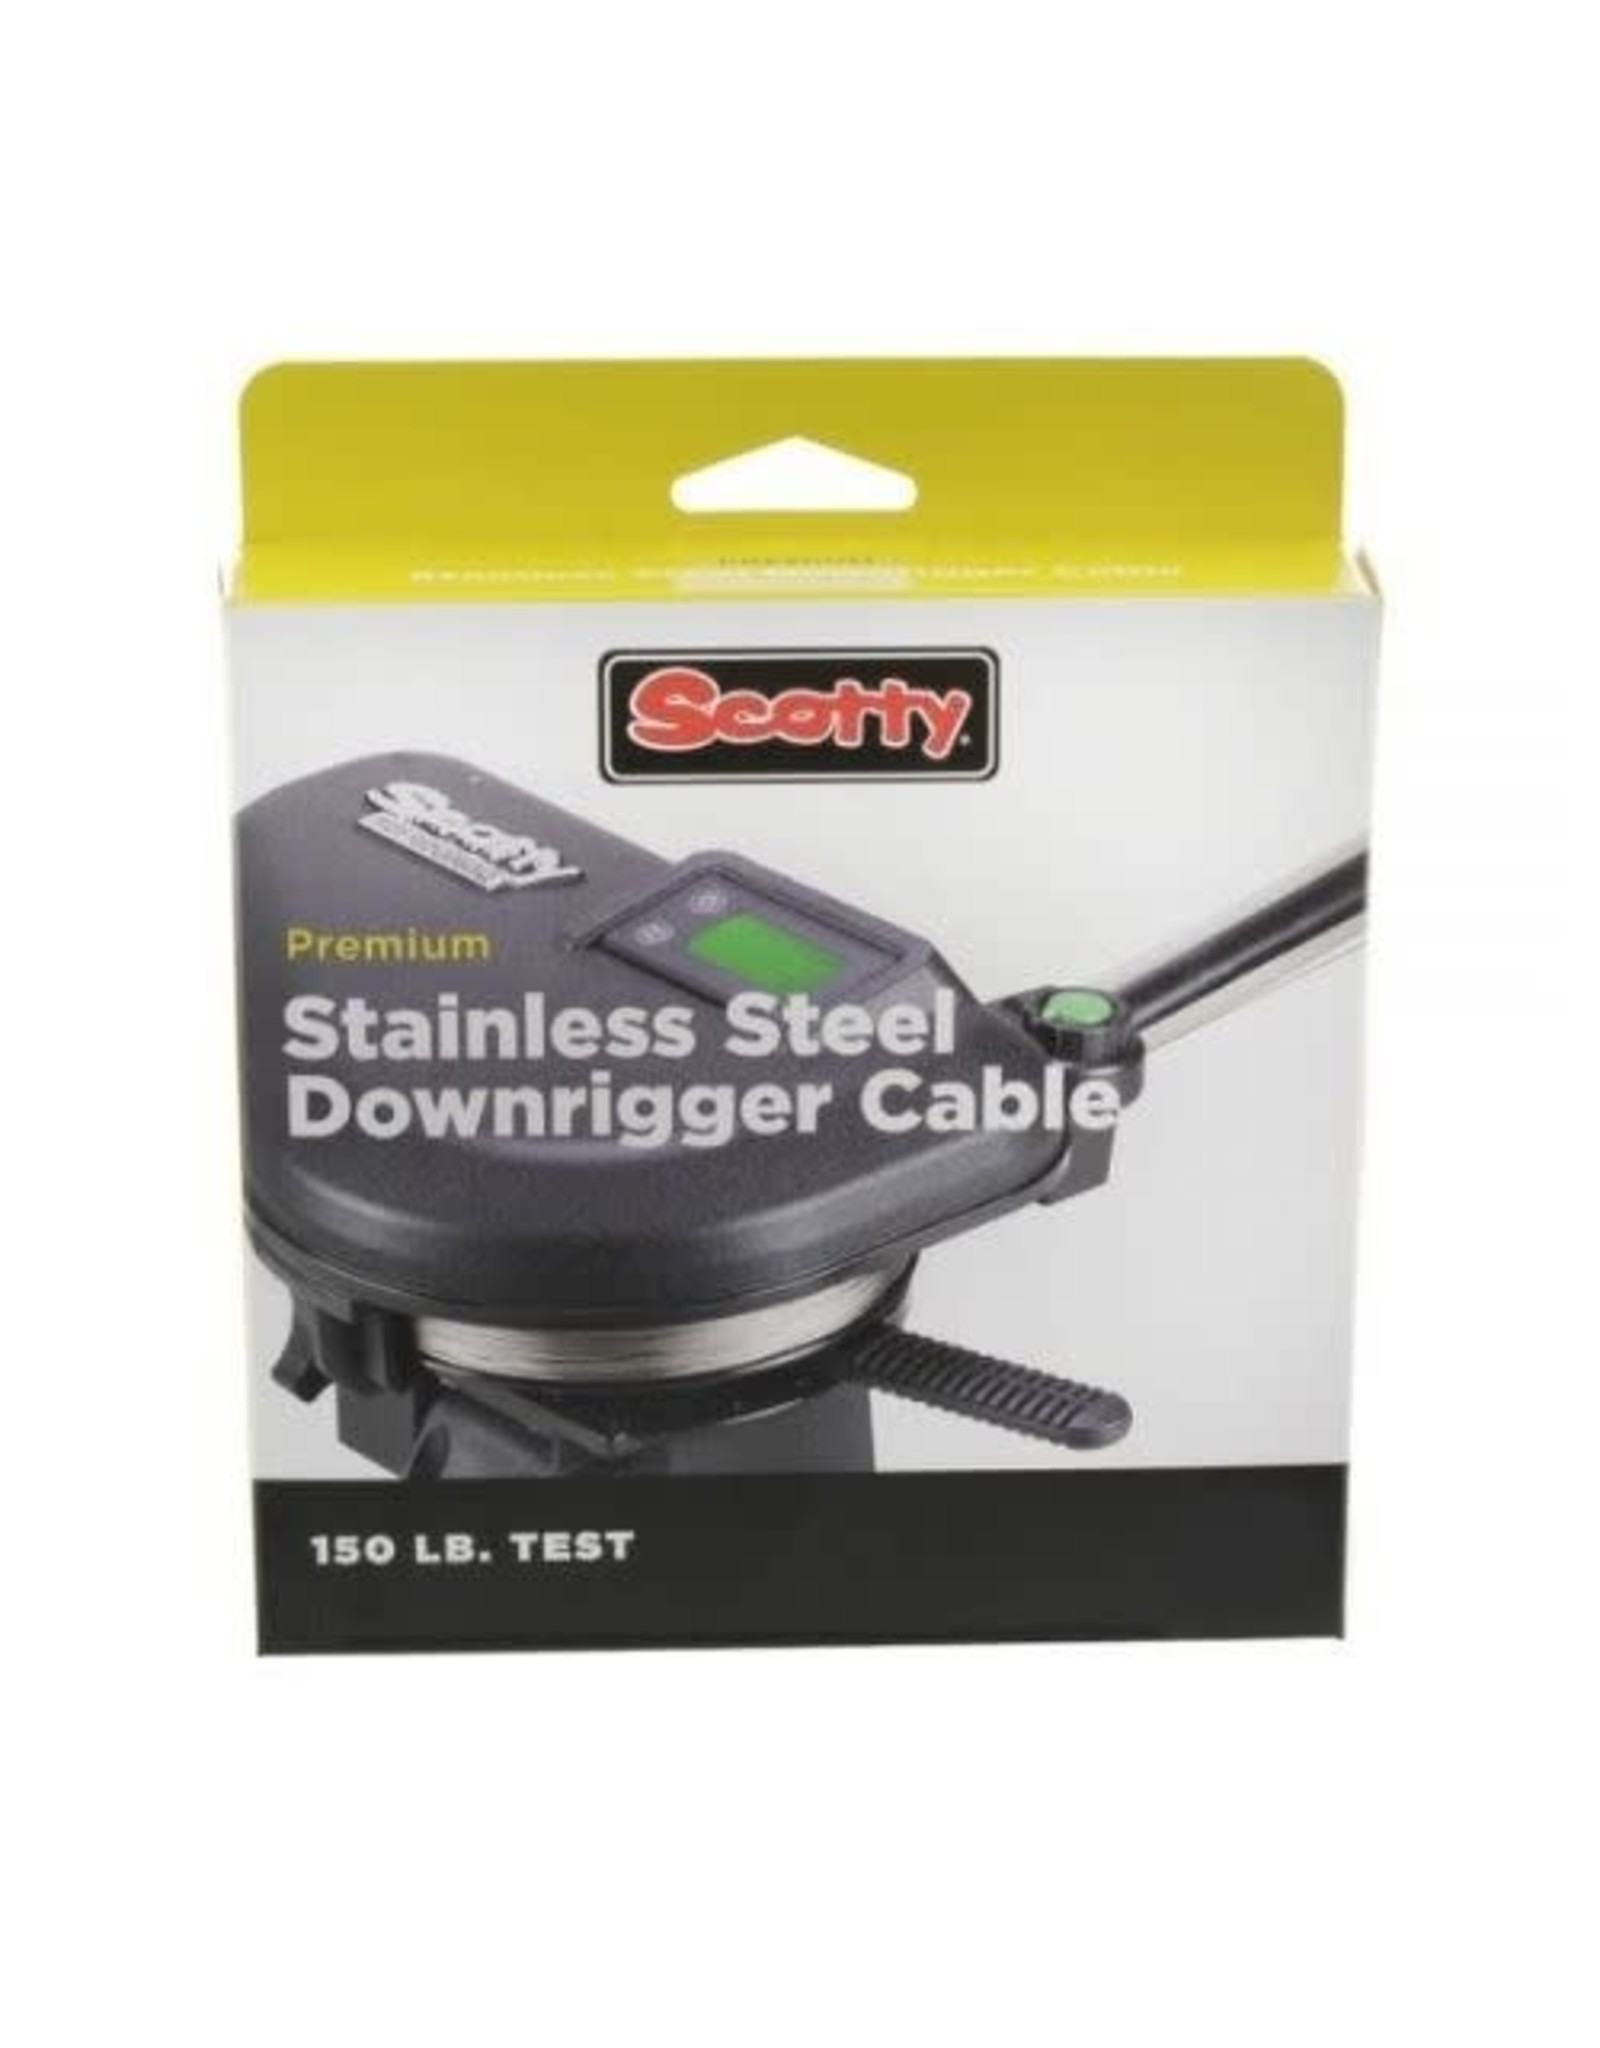 SCOTTY SCOTTY PREMIUM STAINLESS STEEL DOWNRIGGER CABLE 150# 300F